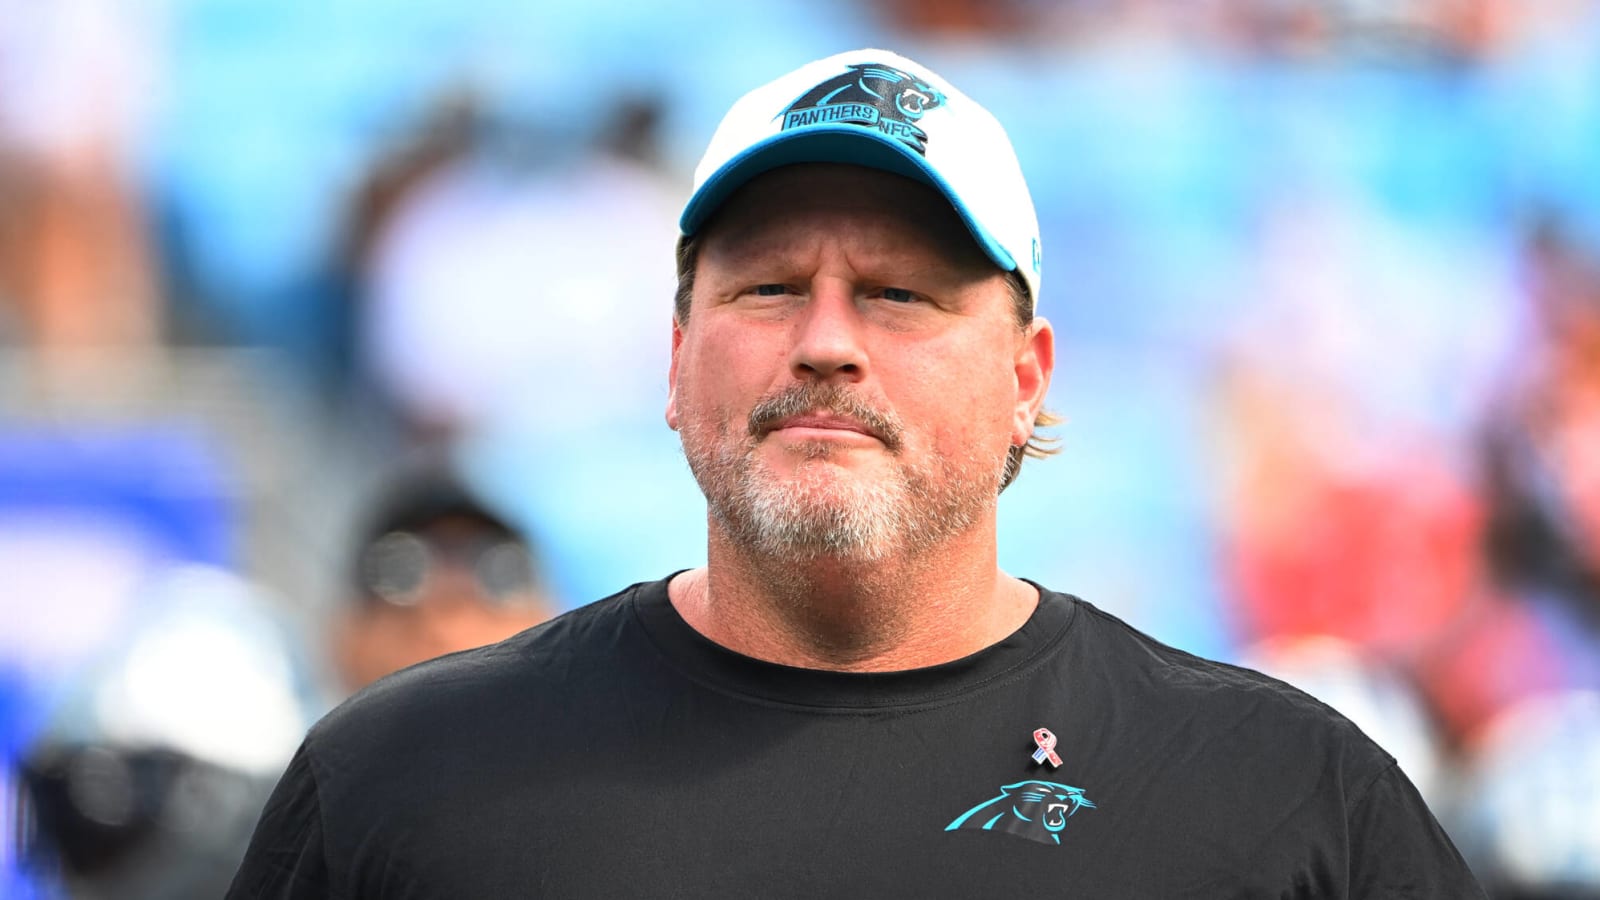 Panthers OC Ben McAdoo: 'I was brought in here to make an impact, but it hasn't happened yet'